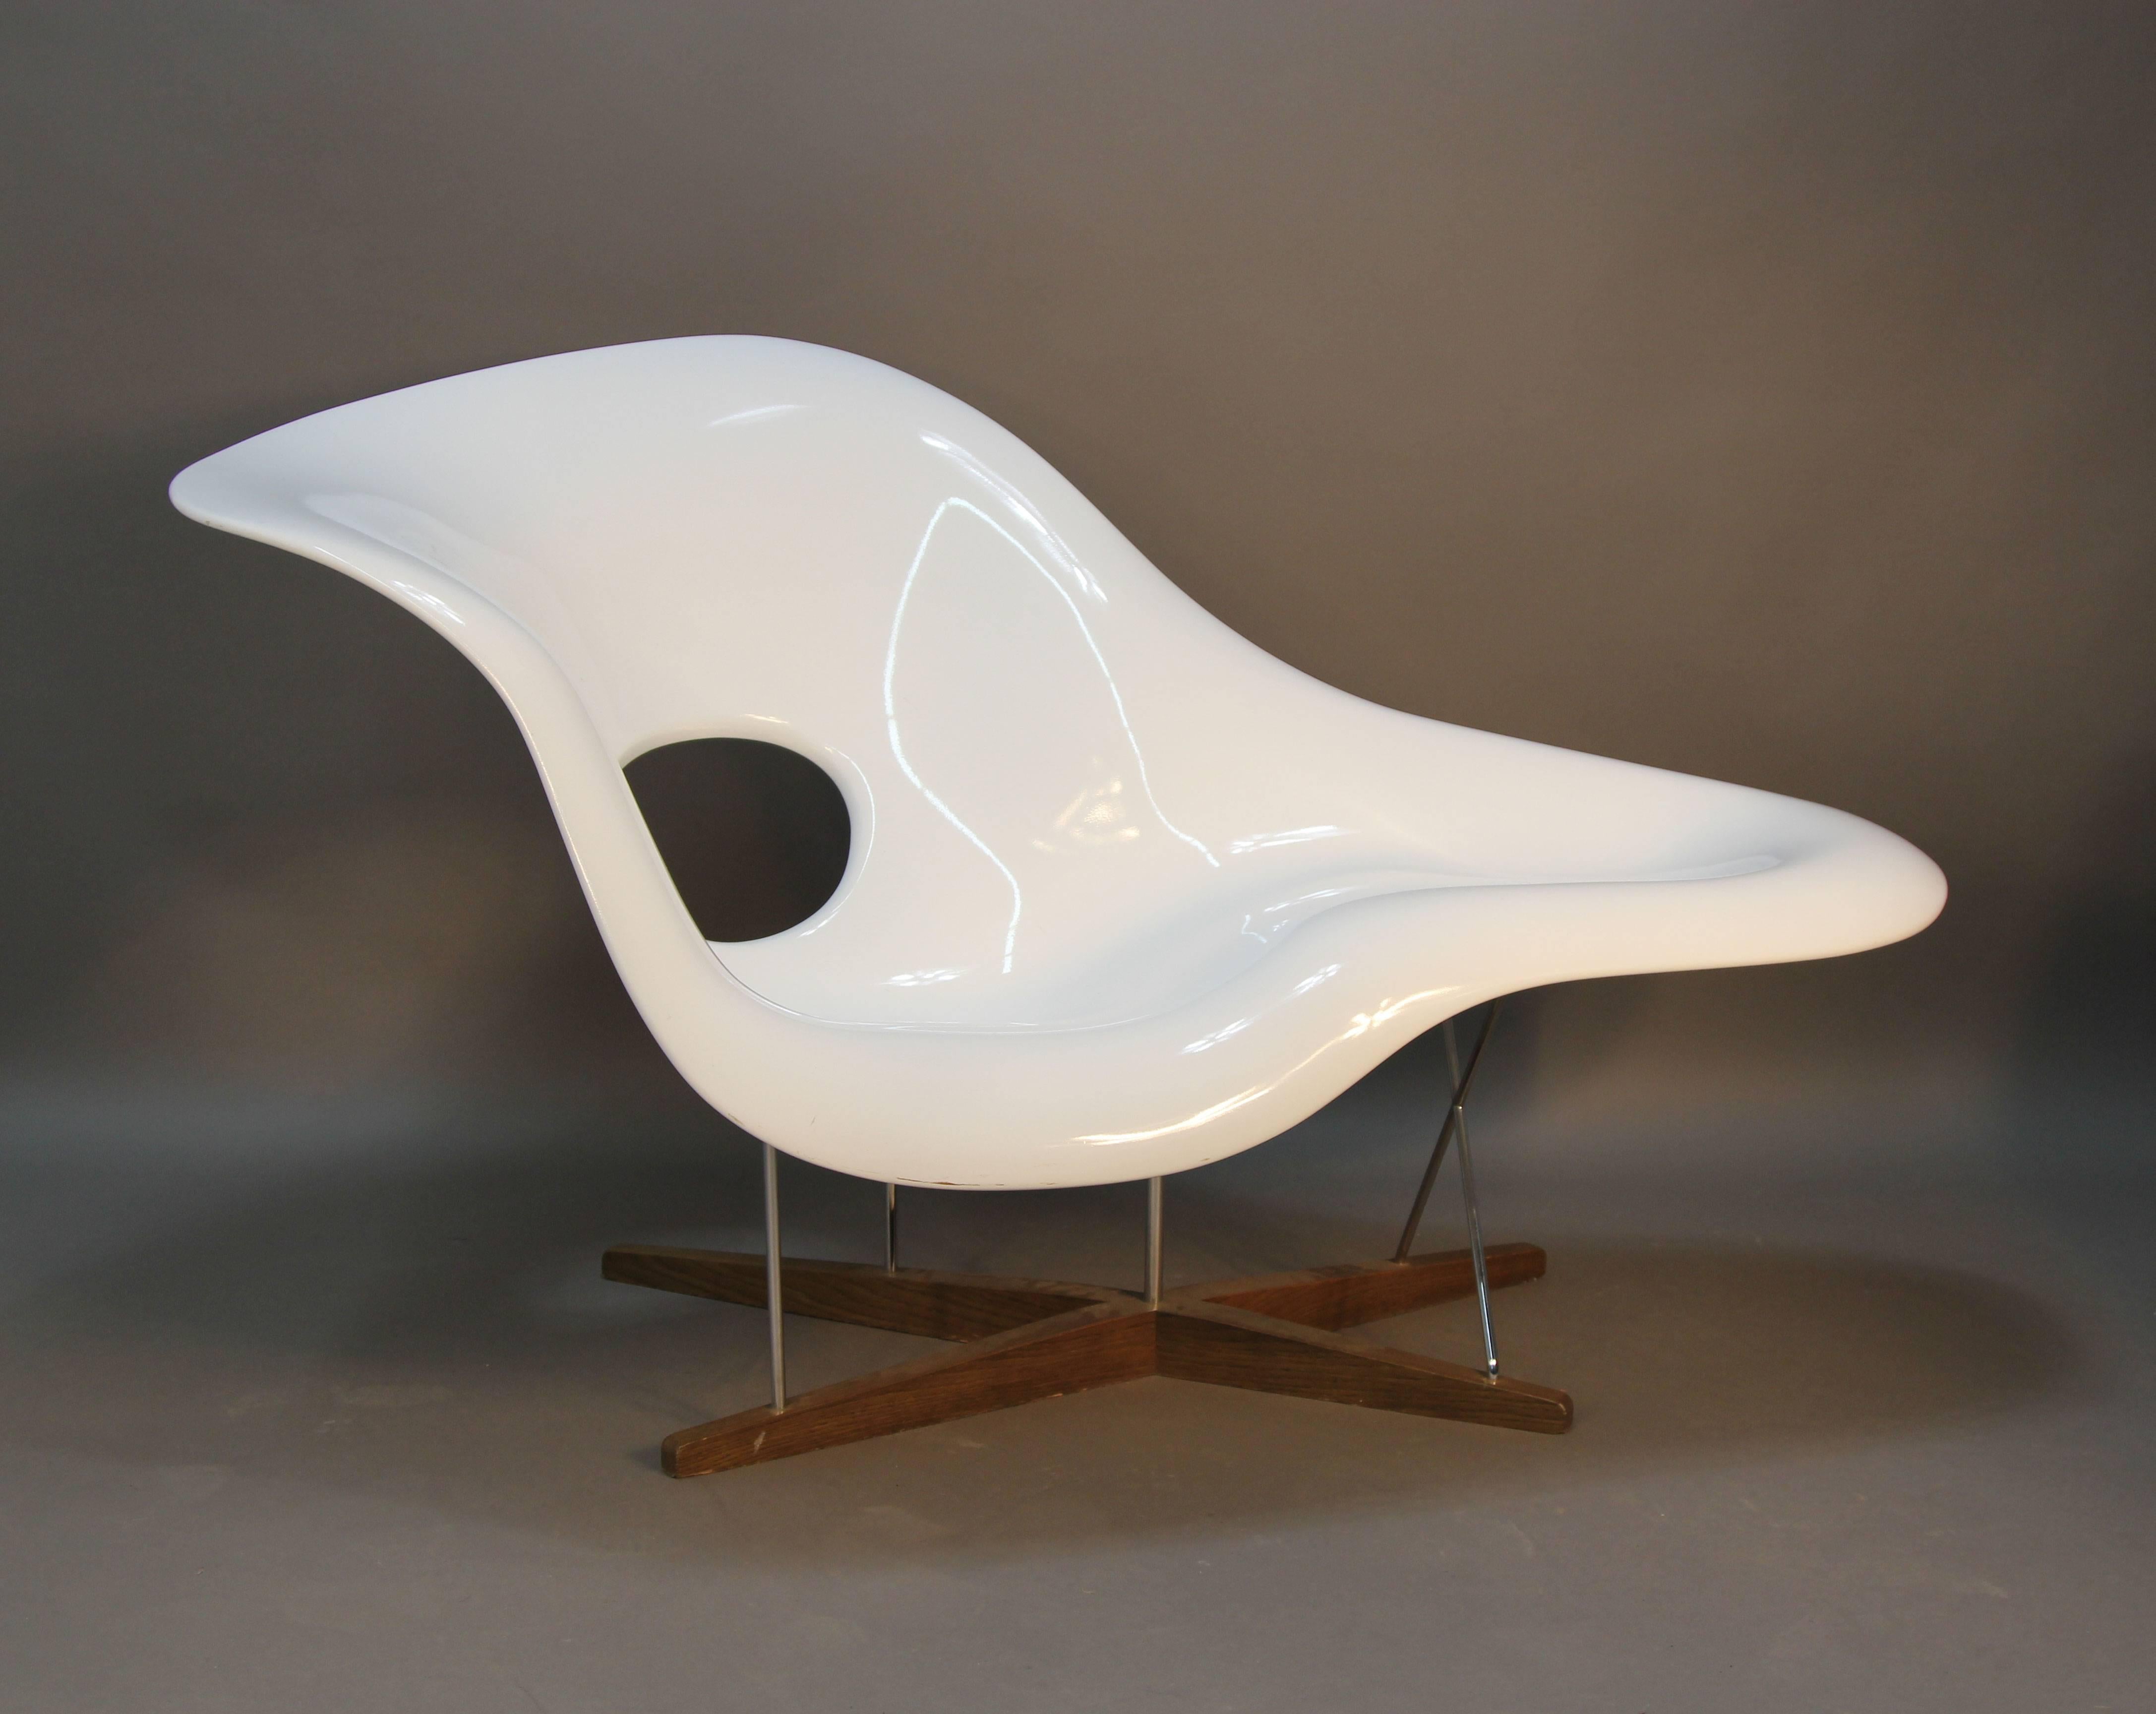 Charles and Ray Eames designed La Chaise as a lounge chair for the 1948 Low Cost Furniture competition at the Museum of Modern Art in New York, but was never produced. Vitra was responsible for La Chaise's first actual production in the 1990s as an